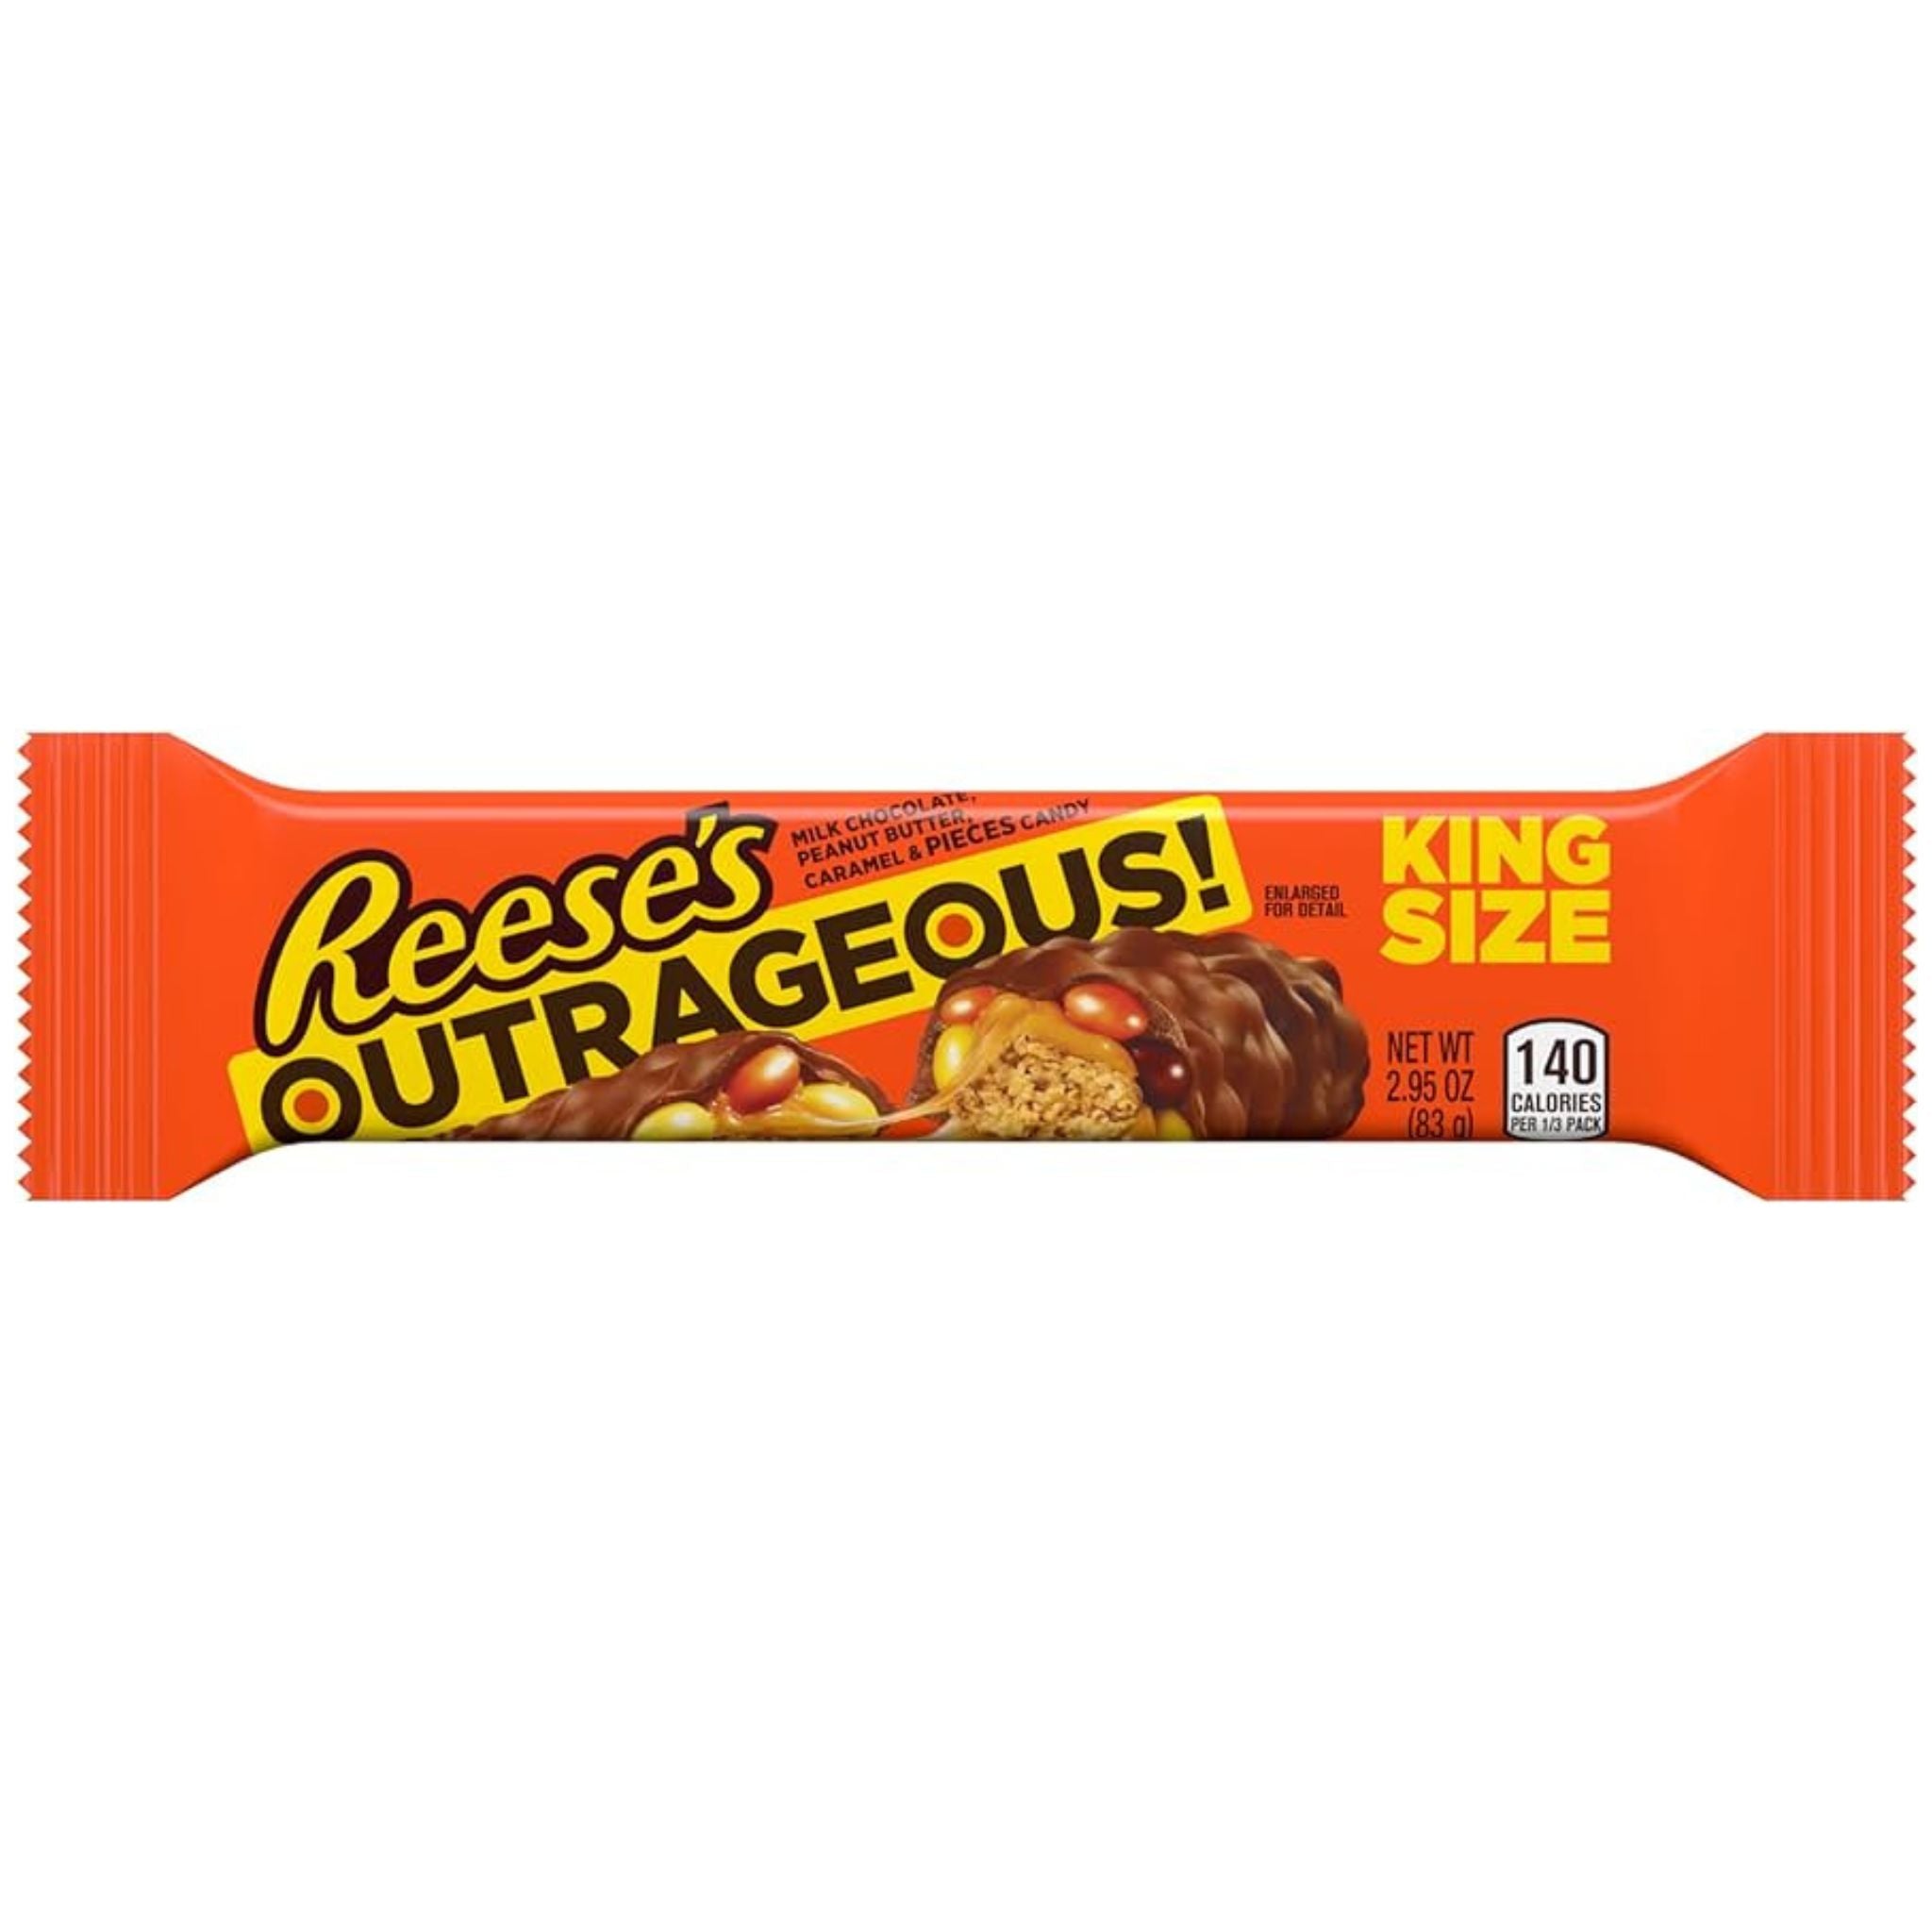 Reese's Outrageous Pieces Bar King Size 83g (USA)